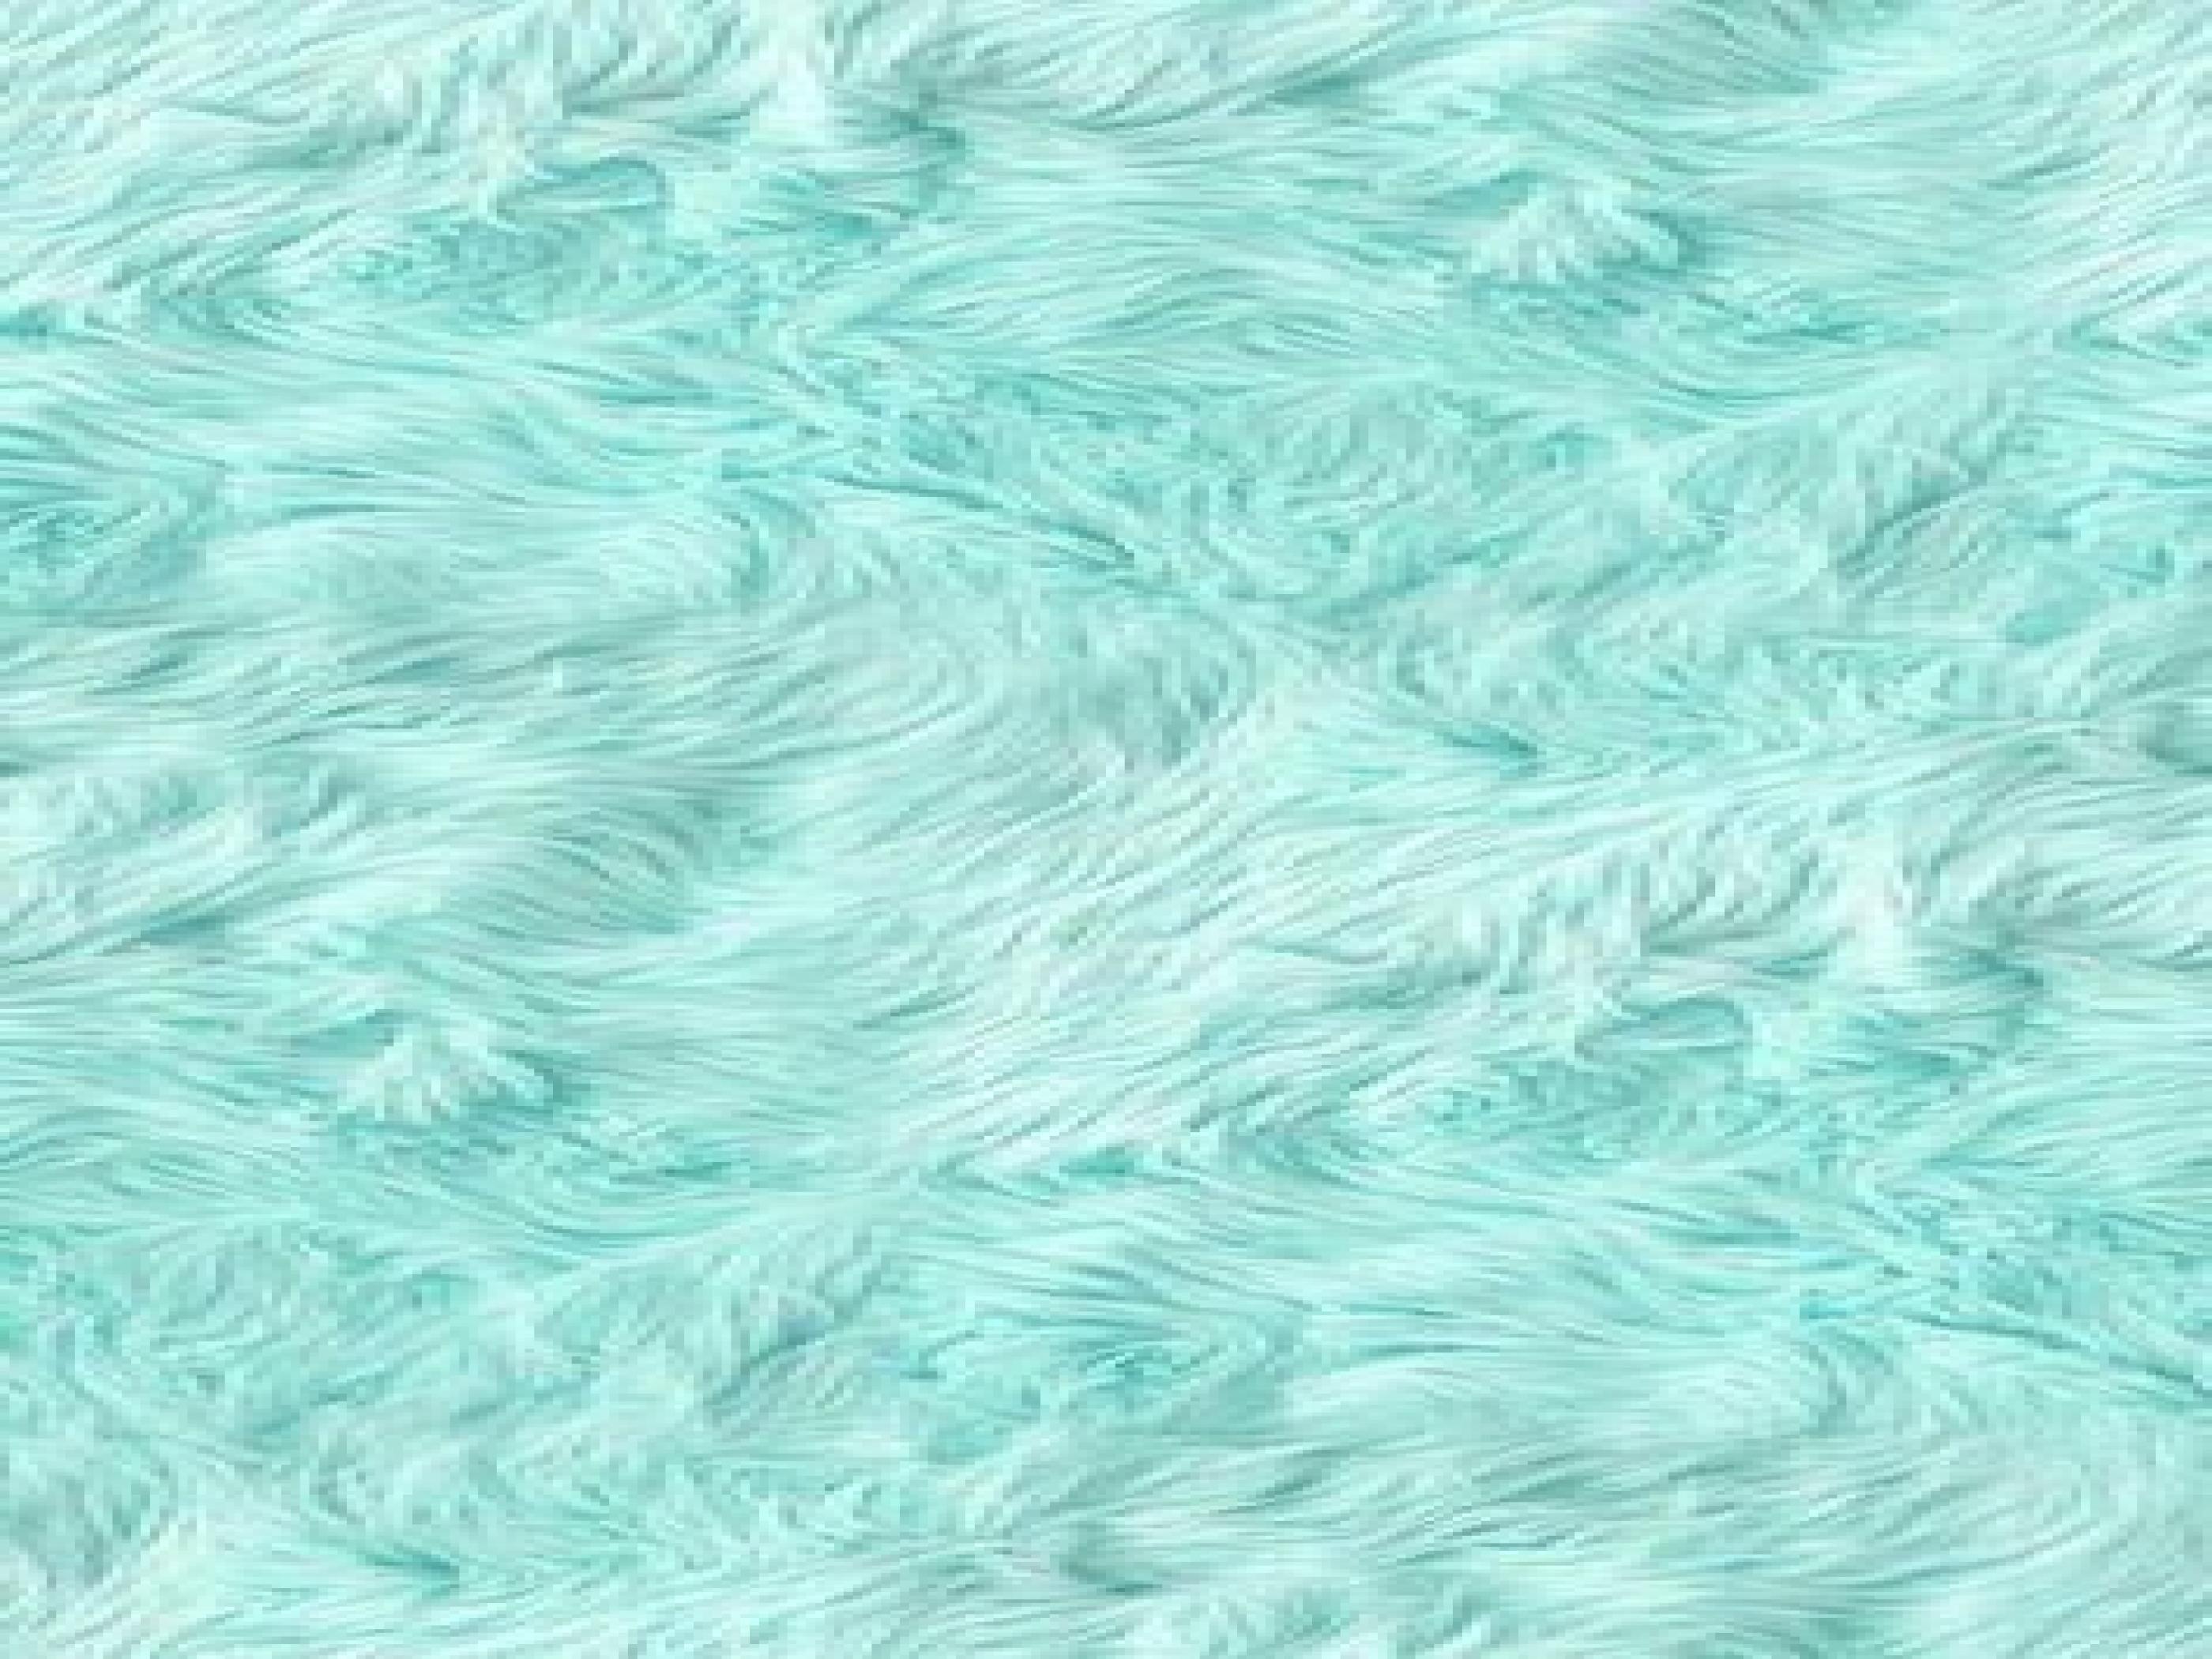 20 Perfect teal aesthetic wallpaper desktop You Can Save It At No Cost ...